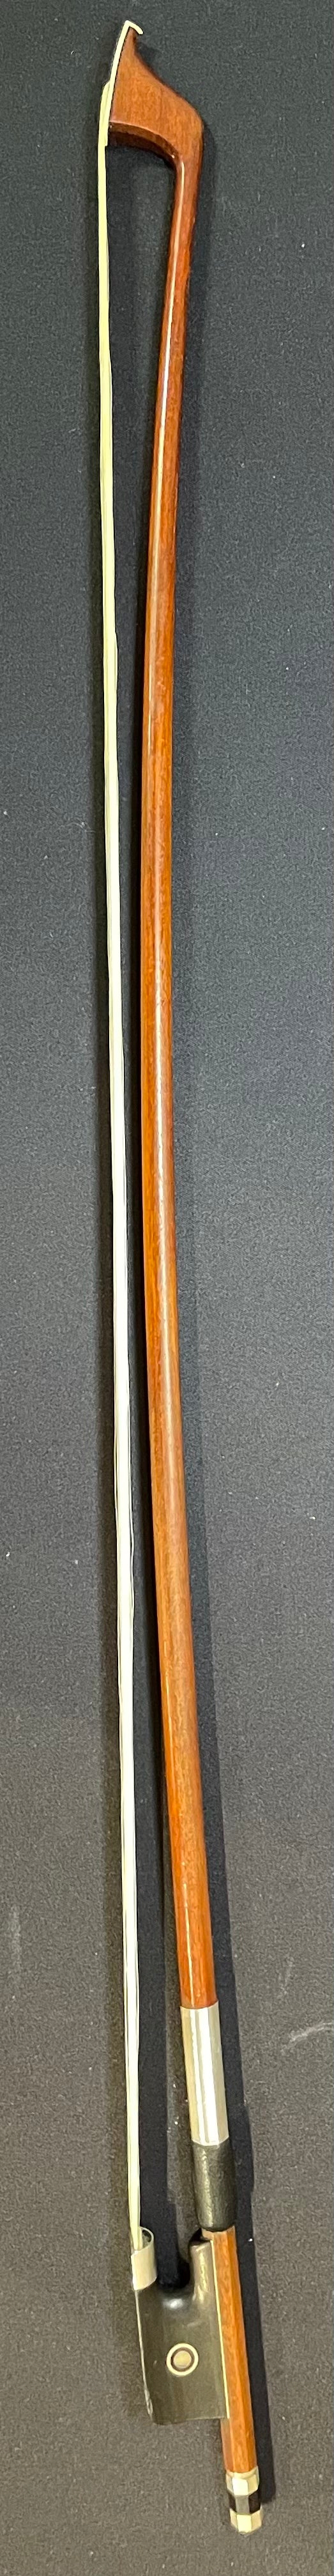 4/4 Cello Bow - Alfred Knoll Original Wood Model